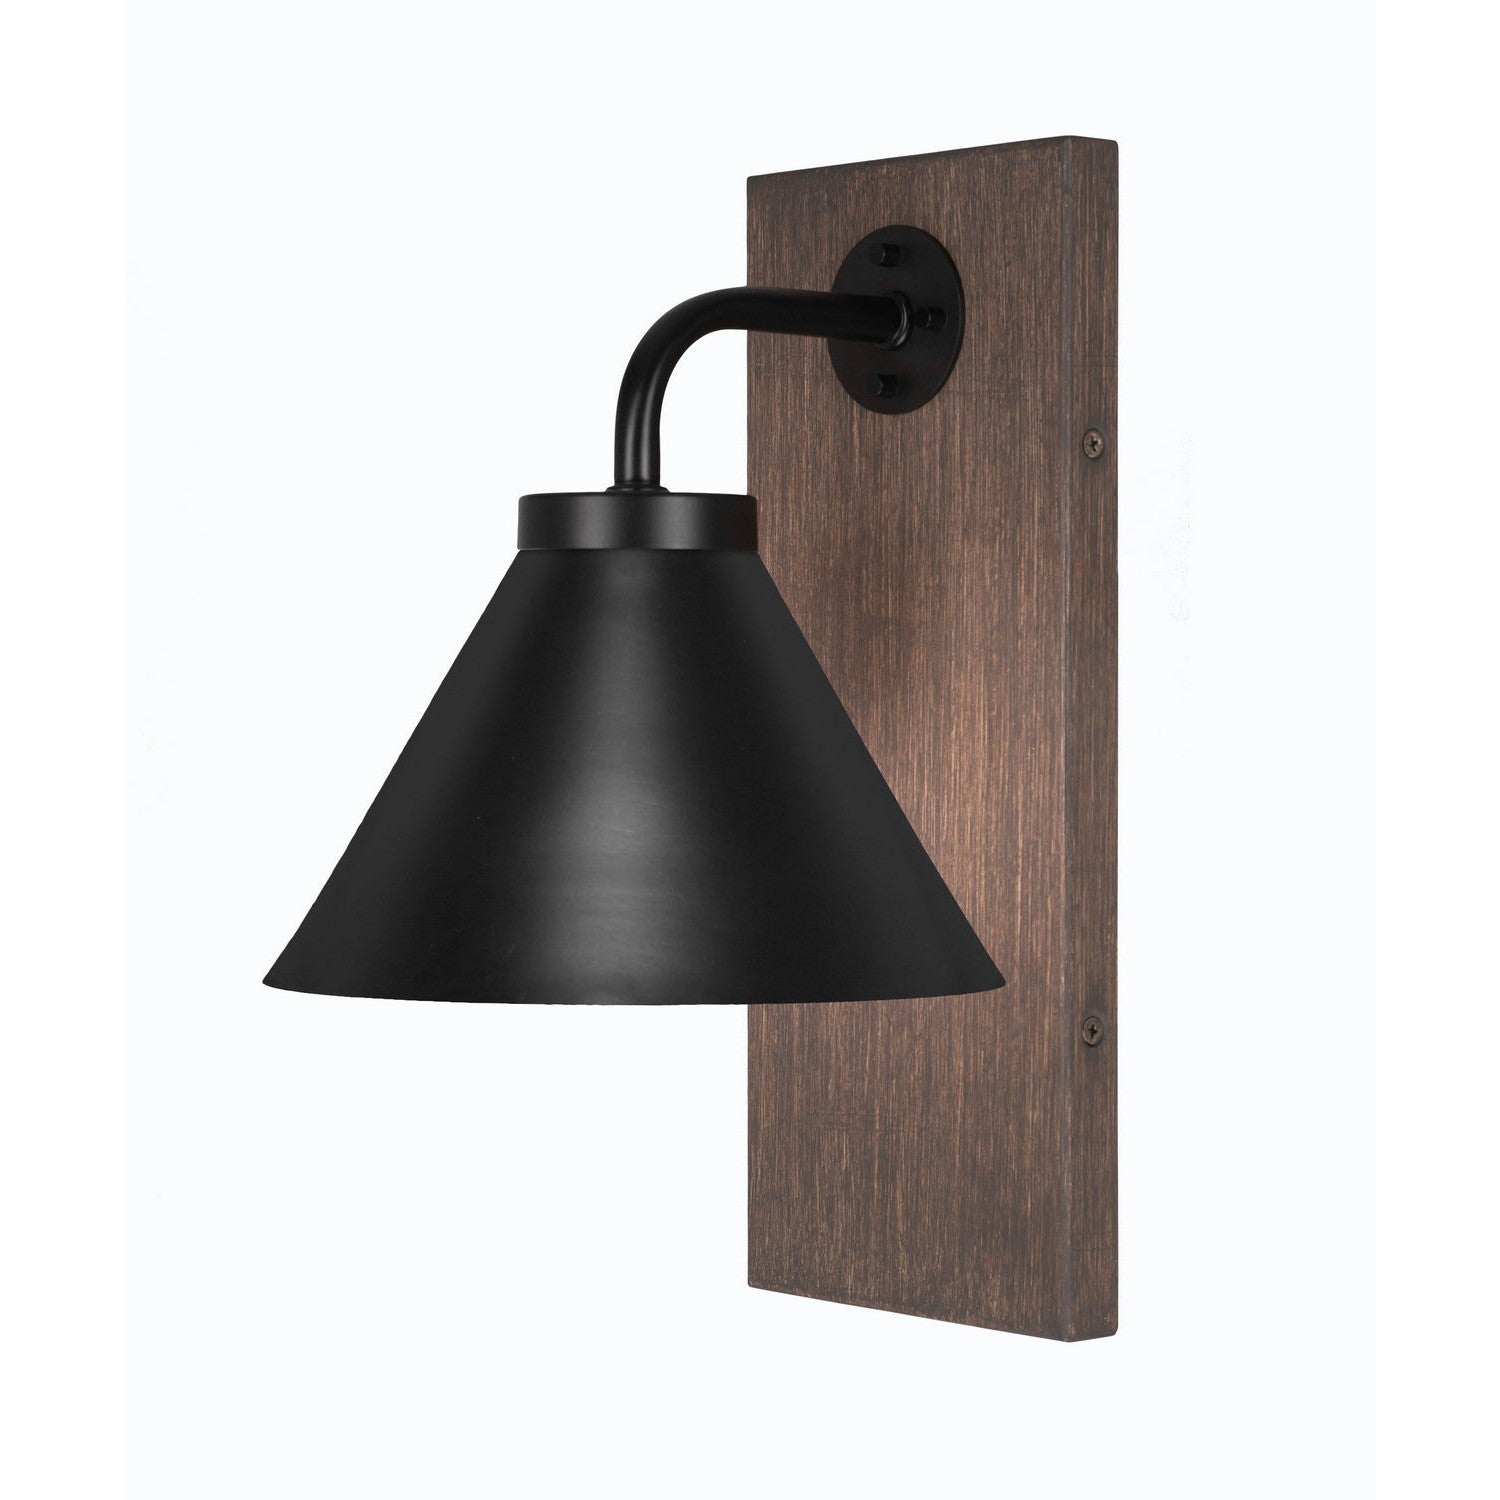 Toltec Oxbridge 1771-mbdw-421-mb Wall Sconce Light - Matte Black & Painted Distressed Wood-look